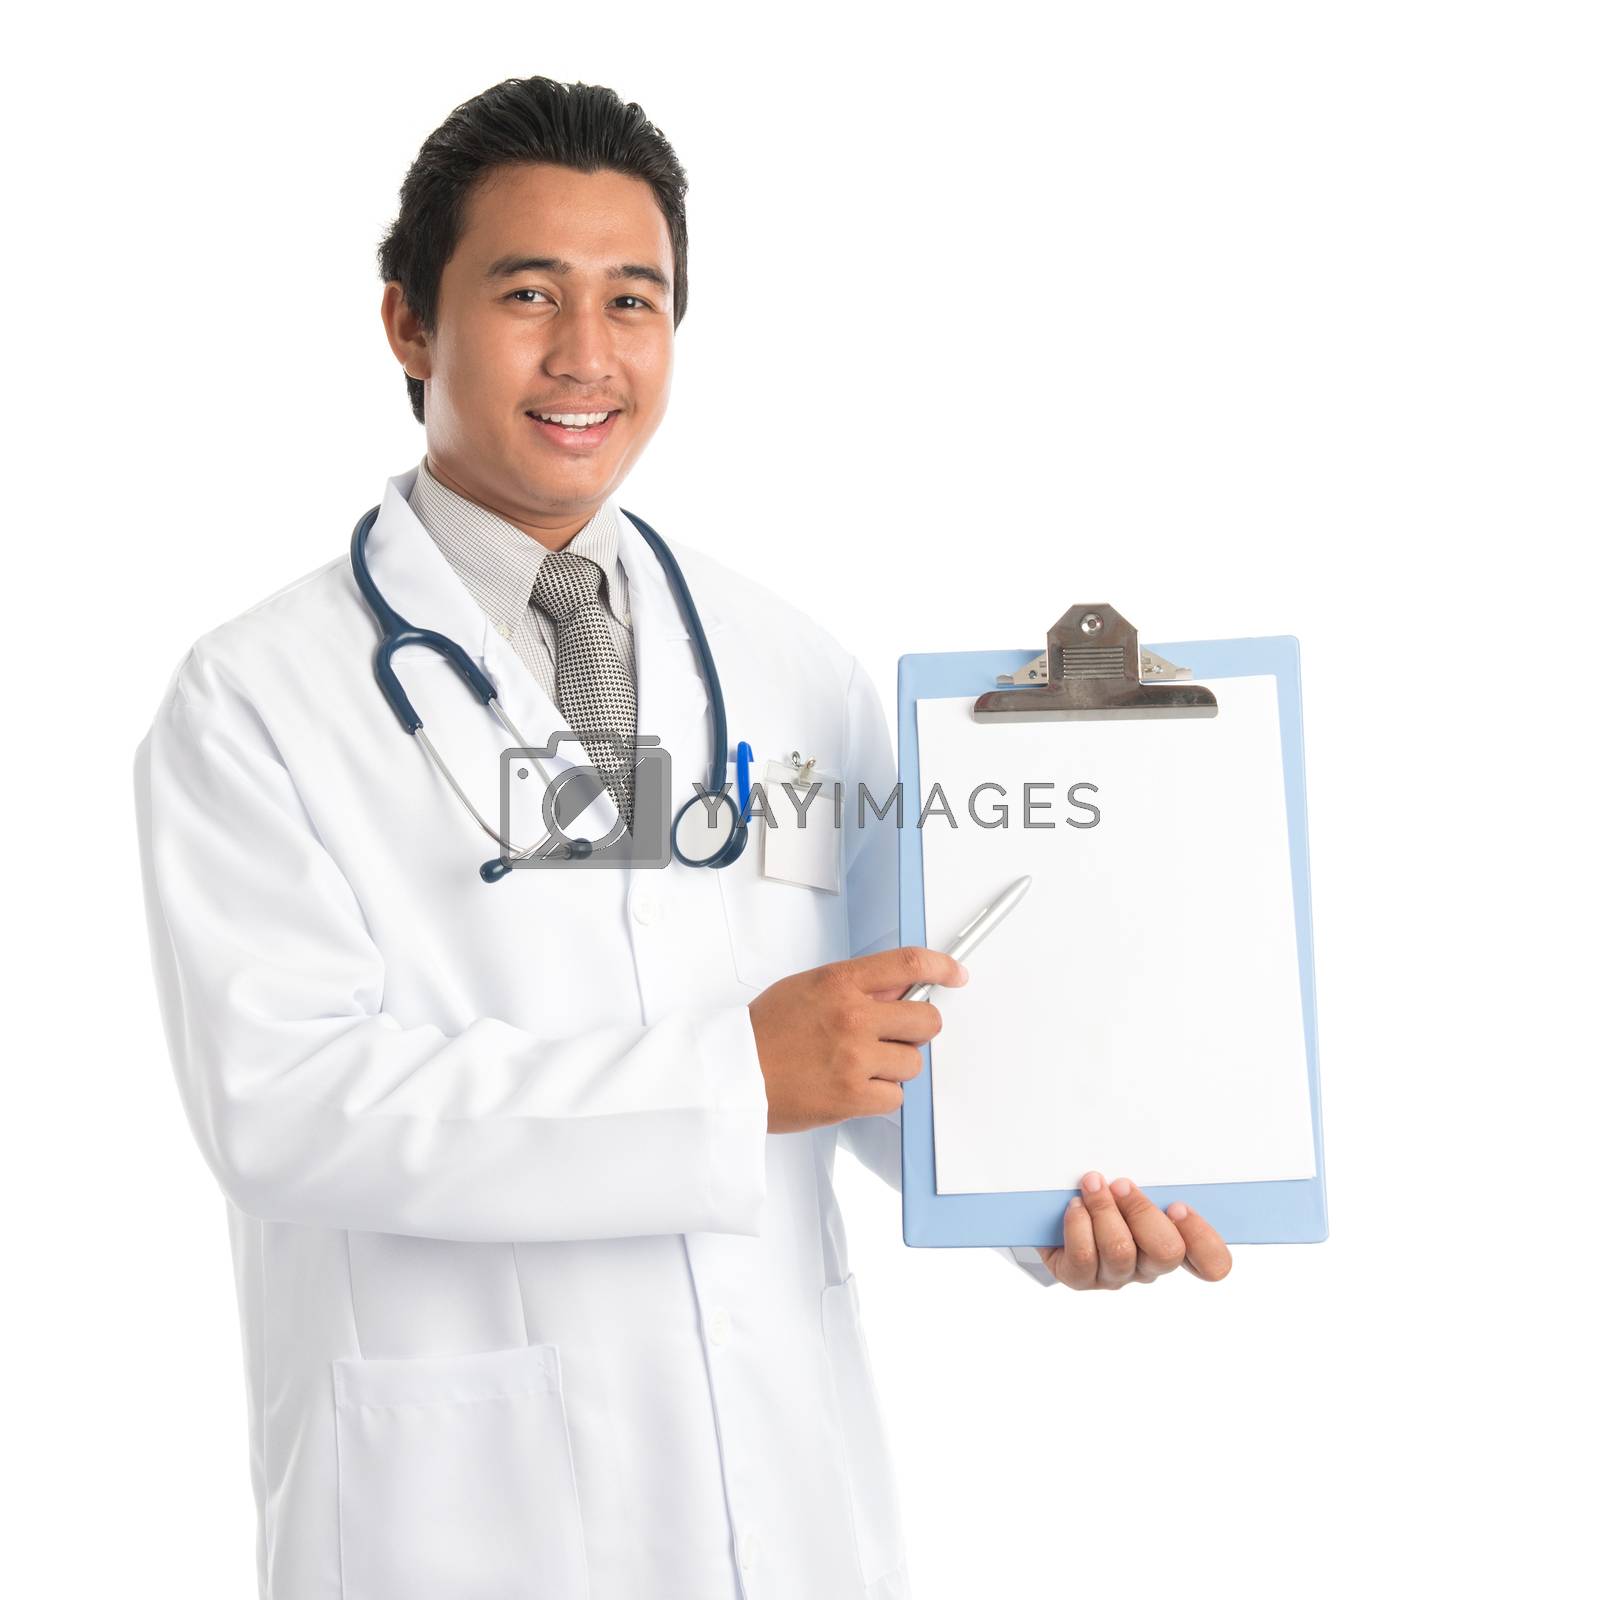 Royalty free image of Southeast Asian medical doctor by szefei